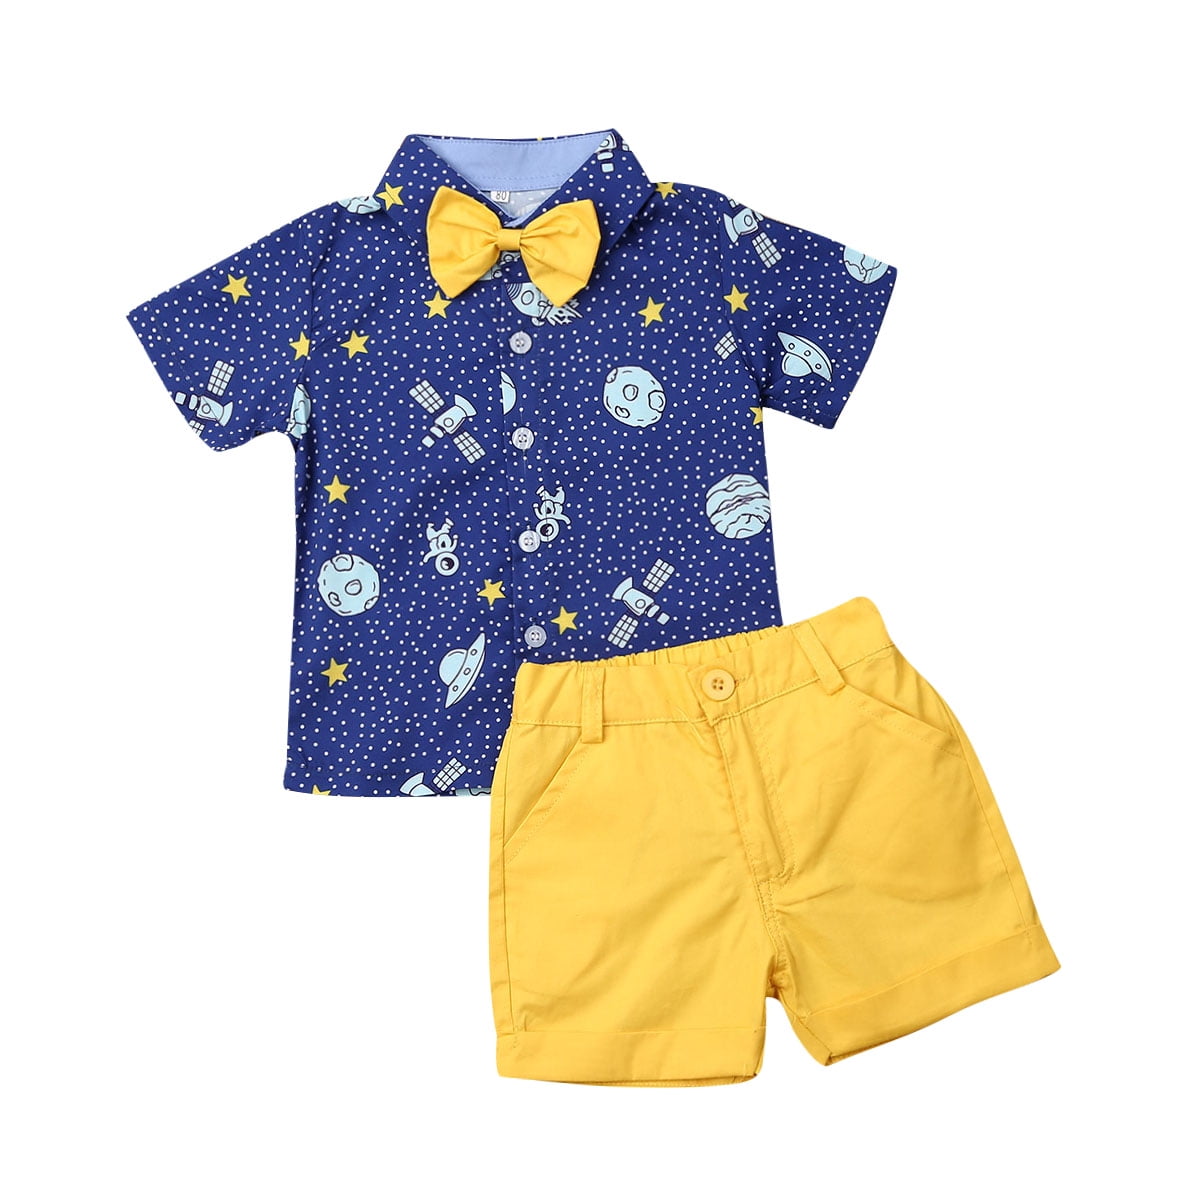 Toddler Kids Baby Boys Gentleman Clothes Set Bow Shirt+Shorts Wedding Party Suit 